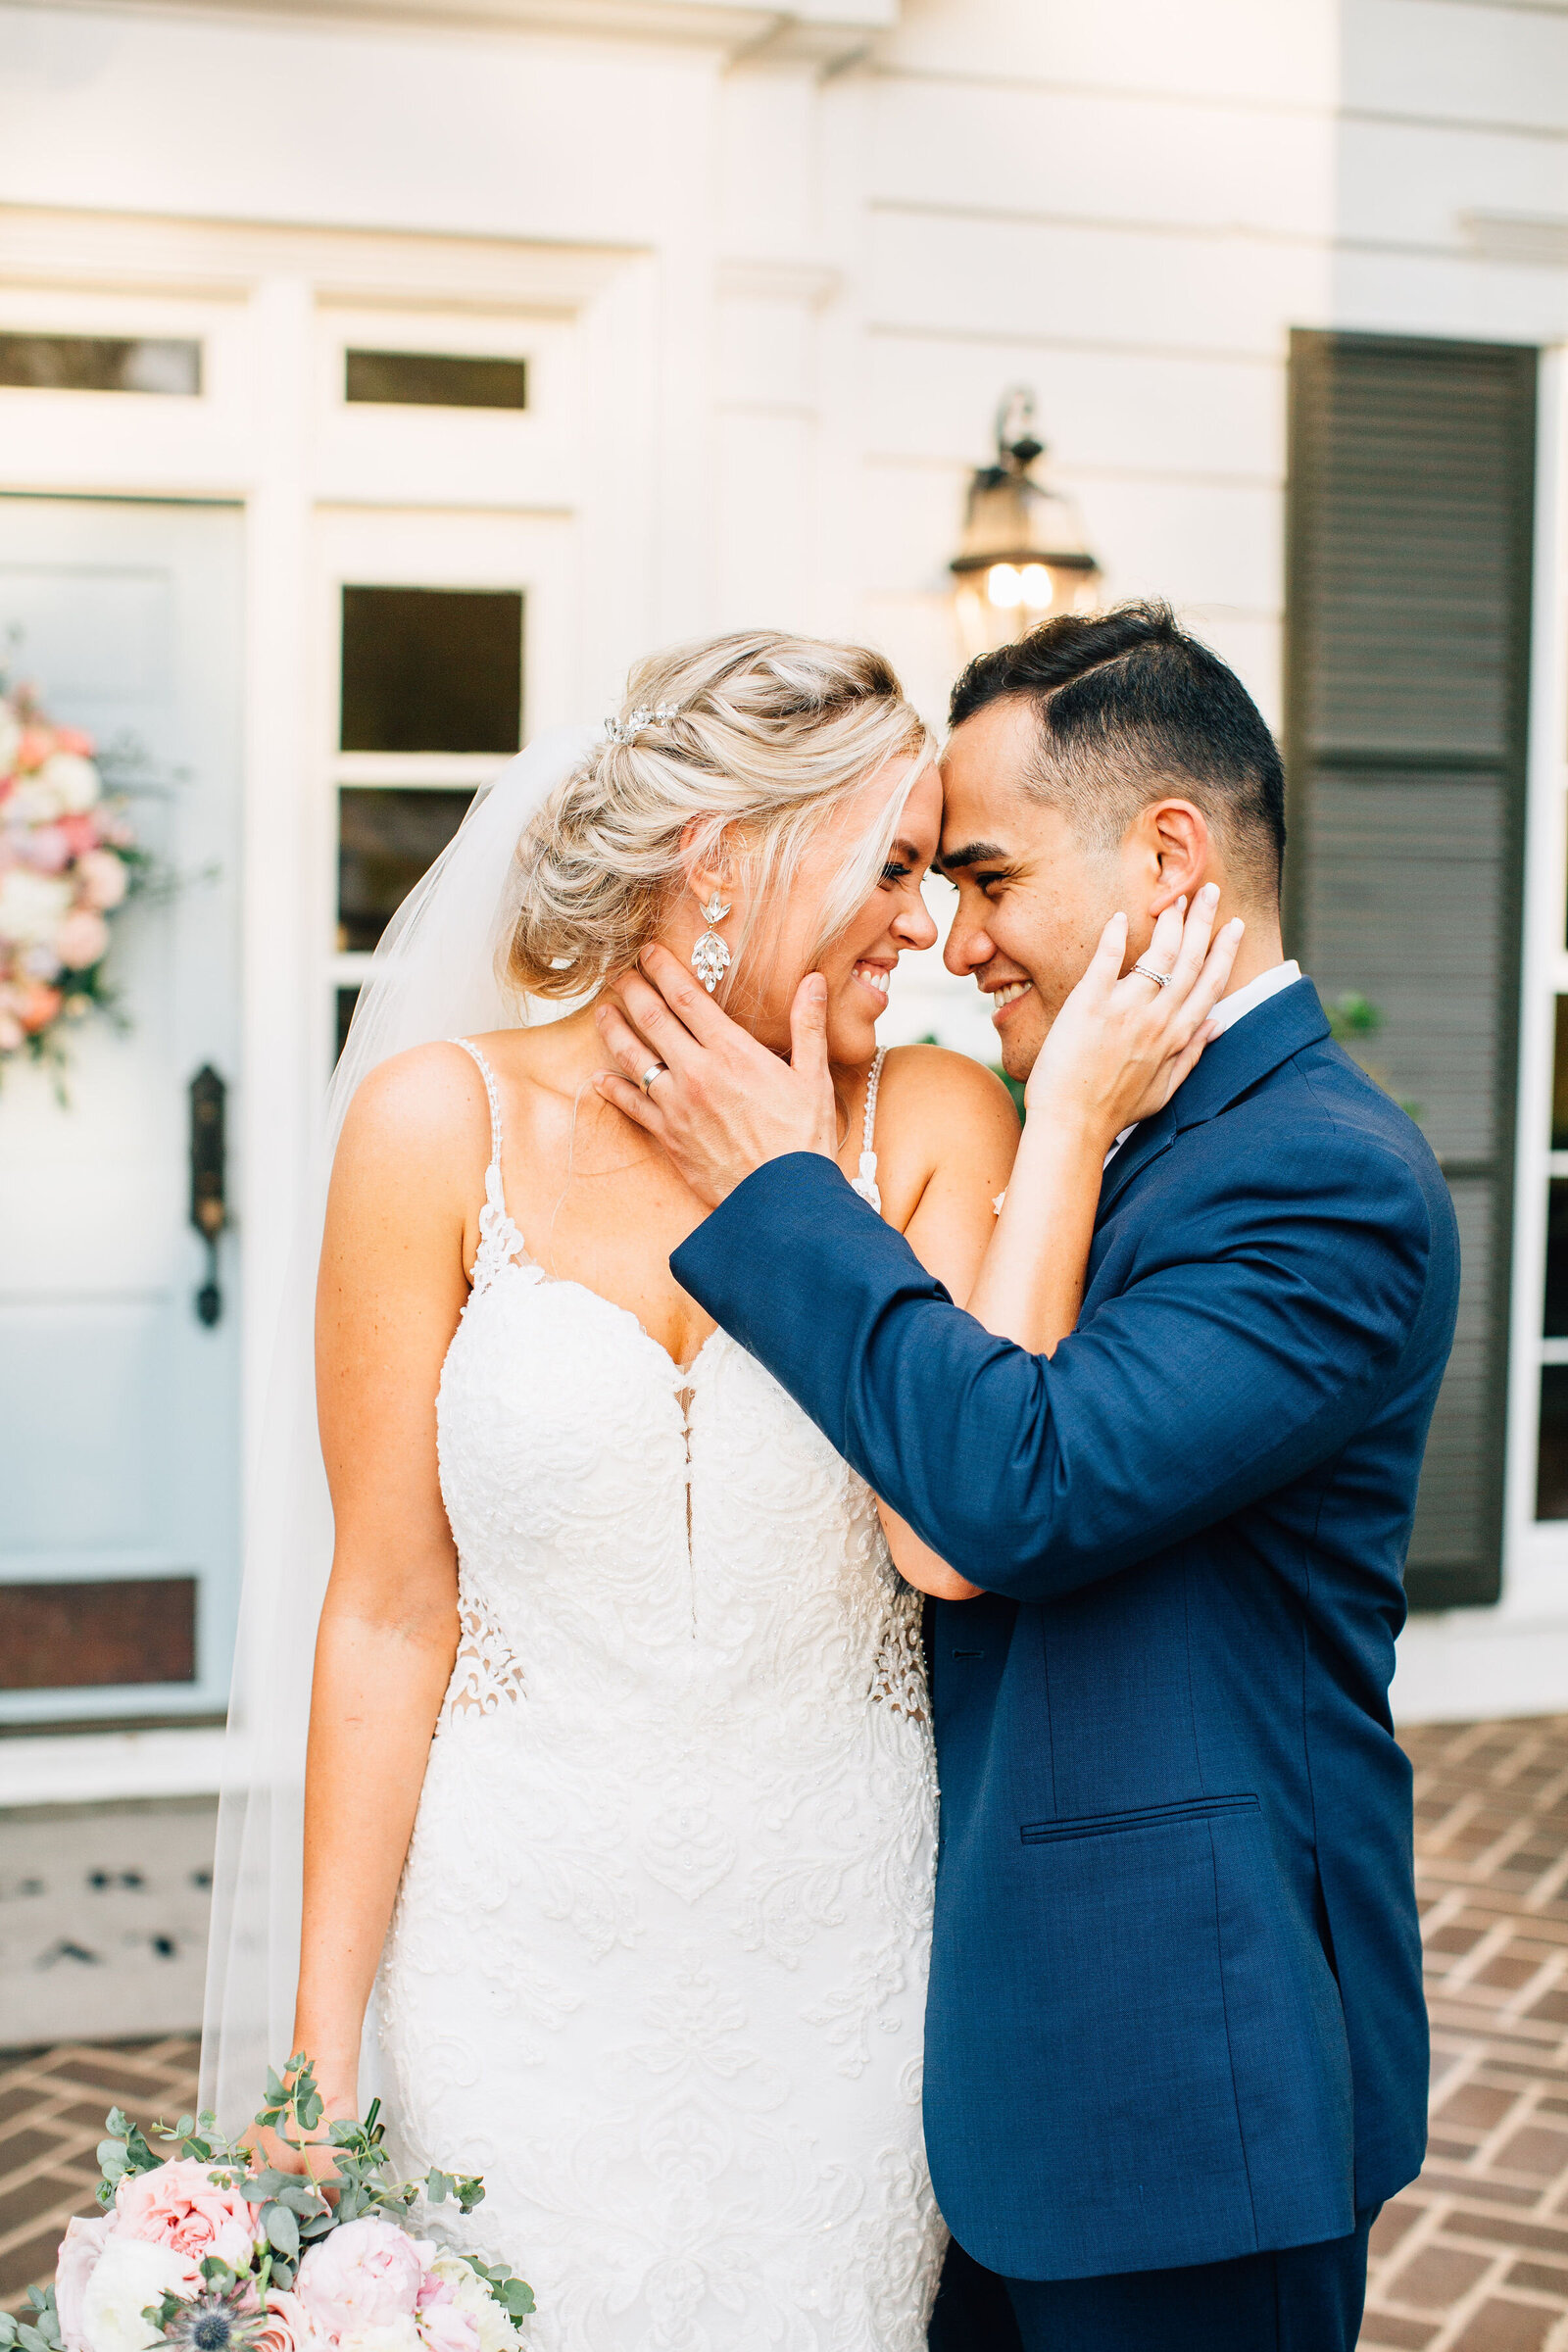 bride with blond hair, wearing a white wedding dress and her groom with brown hair wearing  a blue suit, stand outside a house touching each others cheeks and smiling